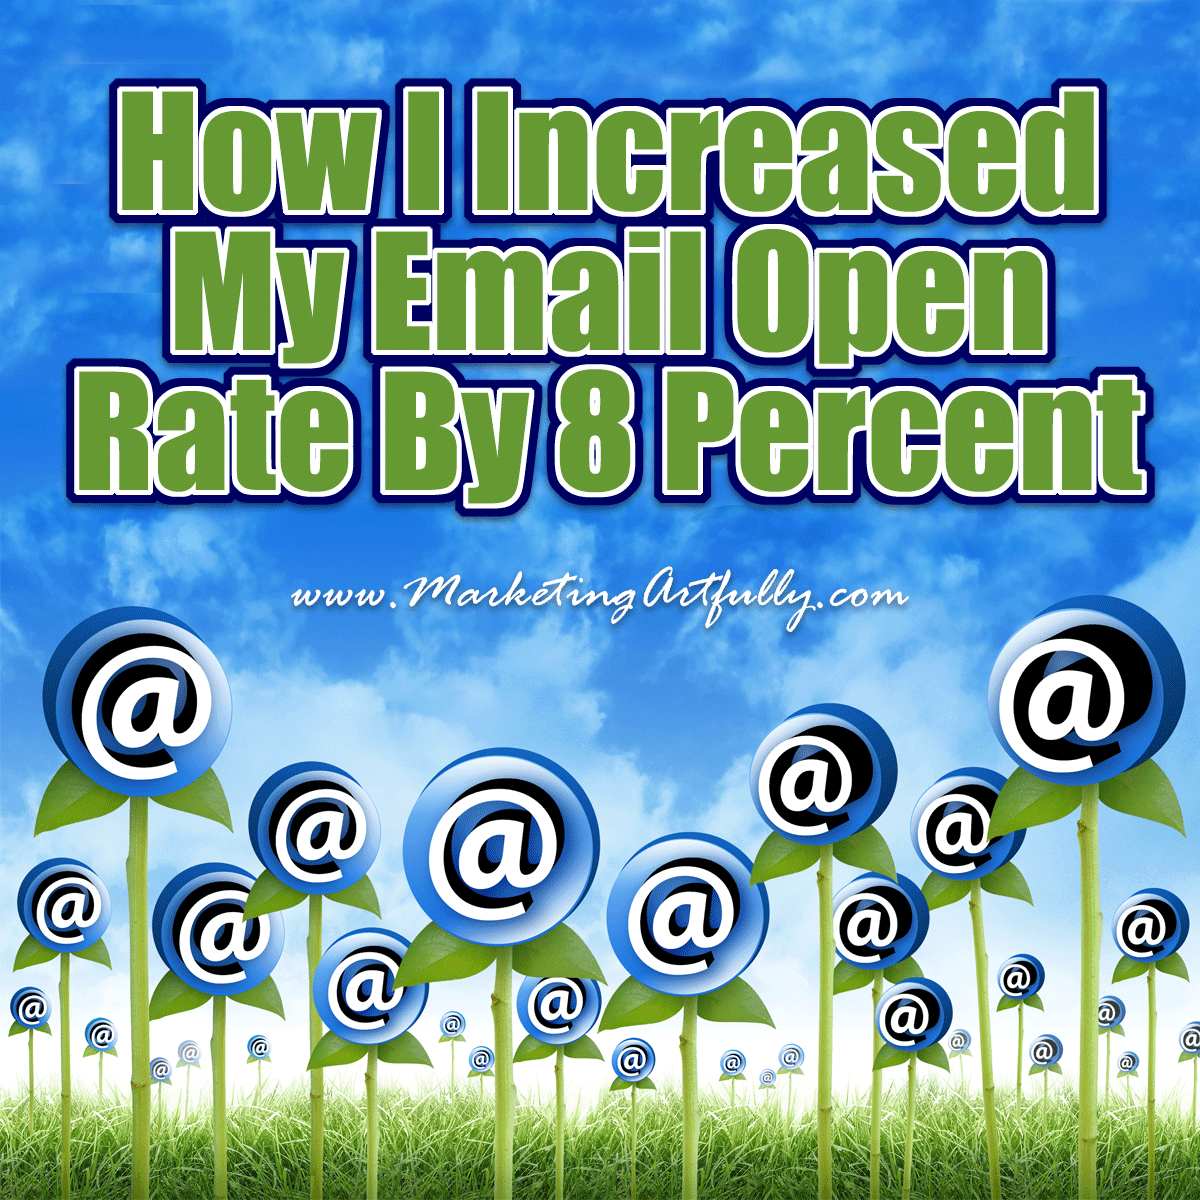 How I Increased My Email Open Rate By 8 Percent | Email Marketing